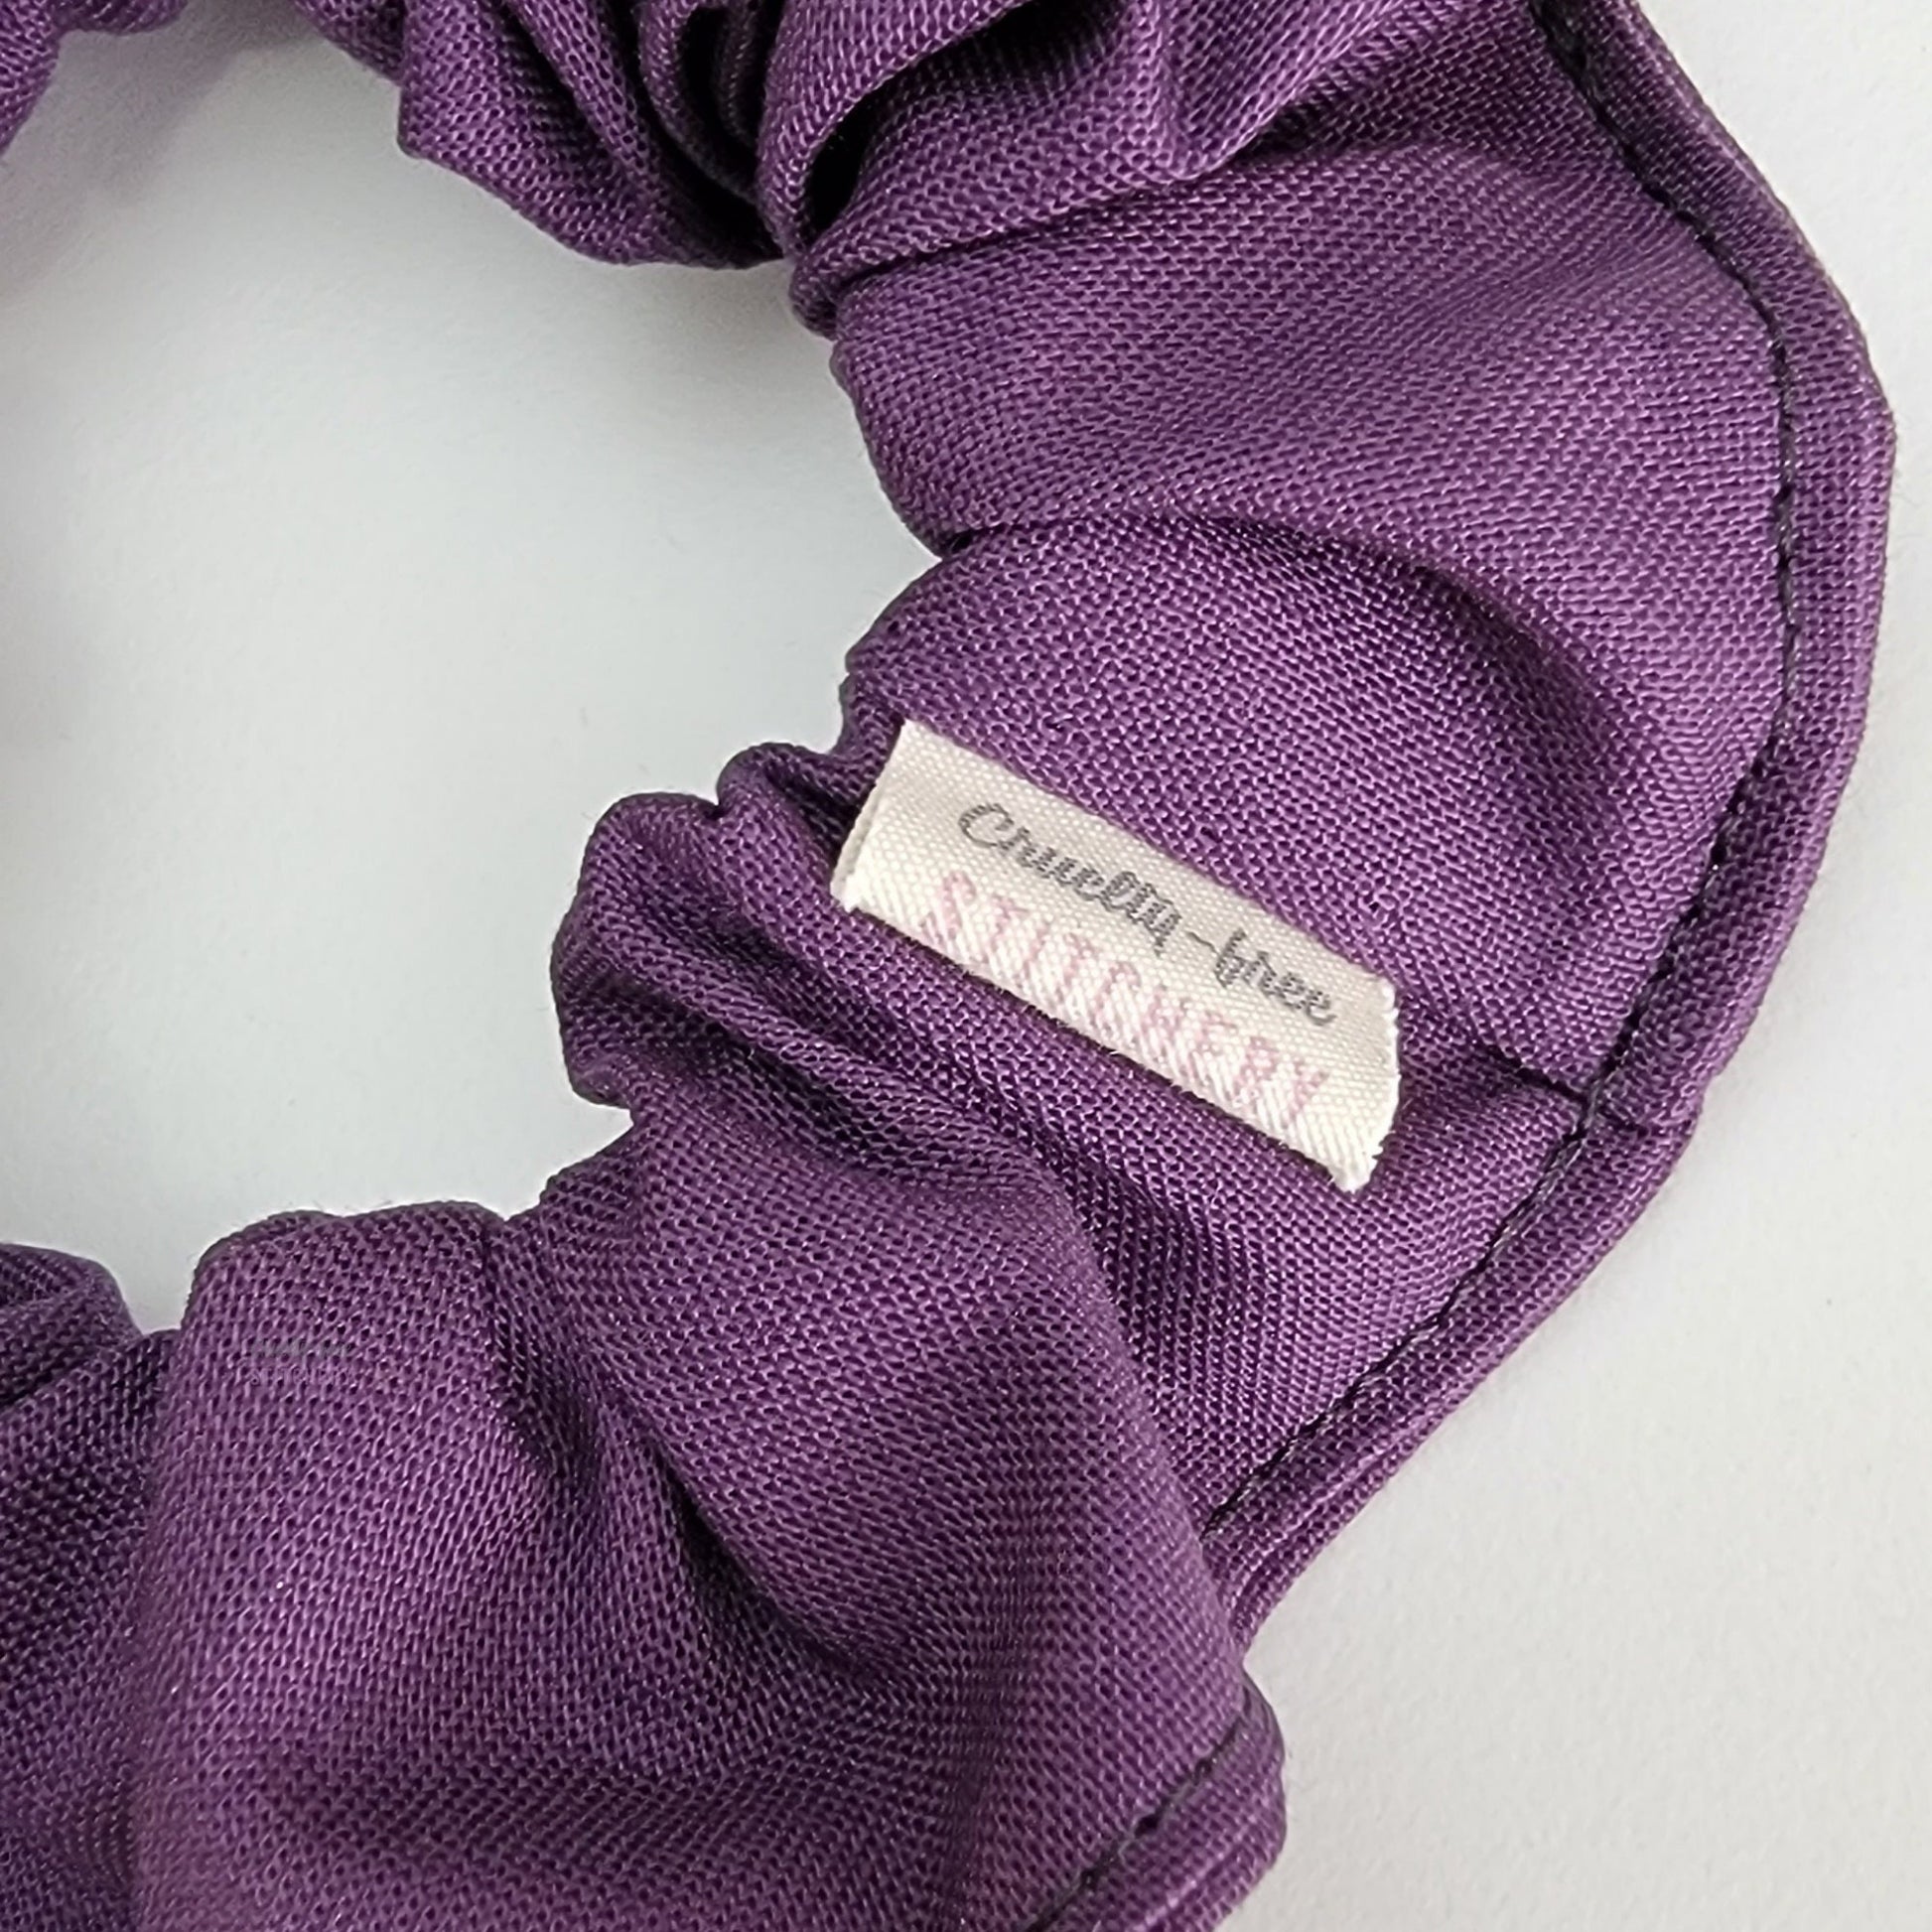 Close-up of the purple scrunchie with a small white tag with the Cruelty-Free Stitchery logo.